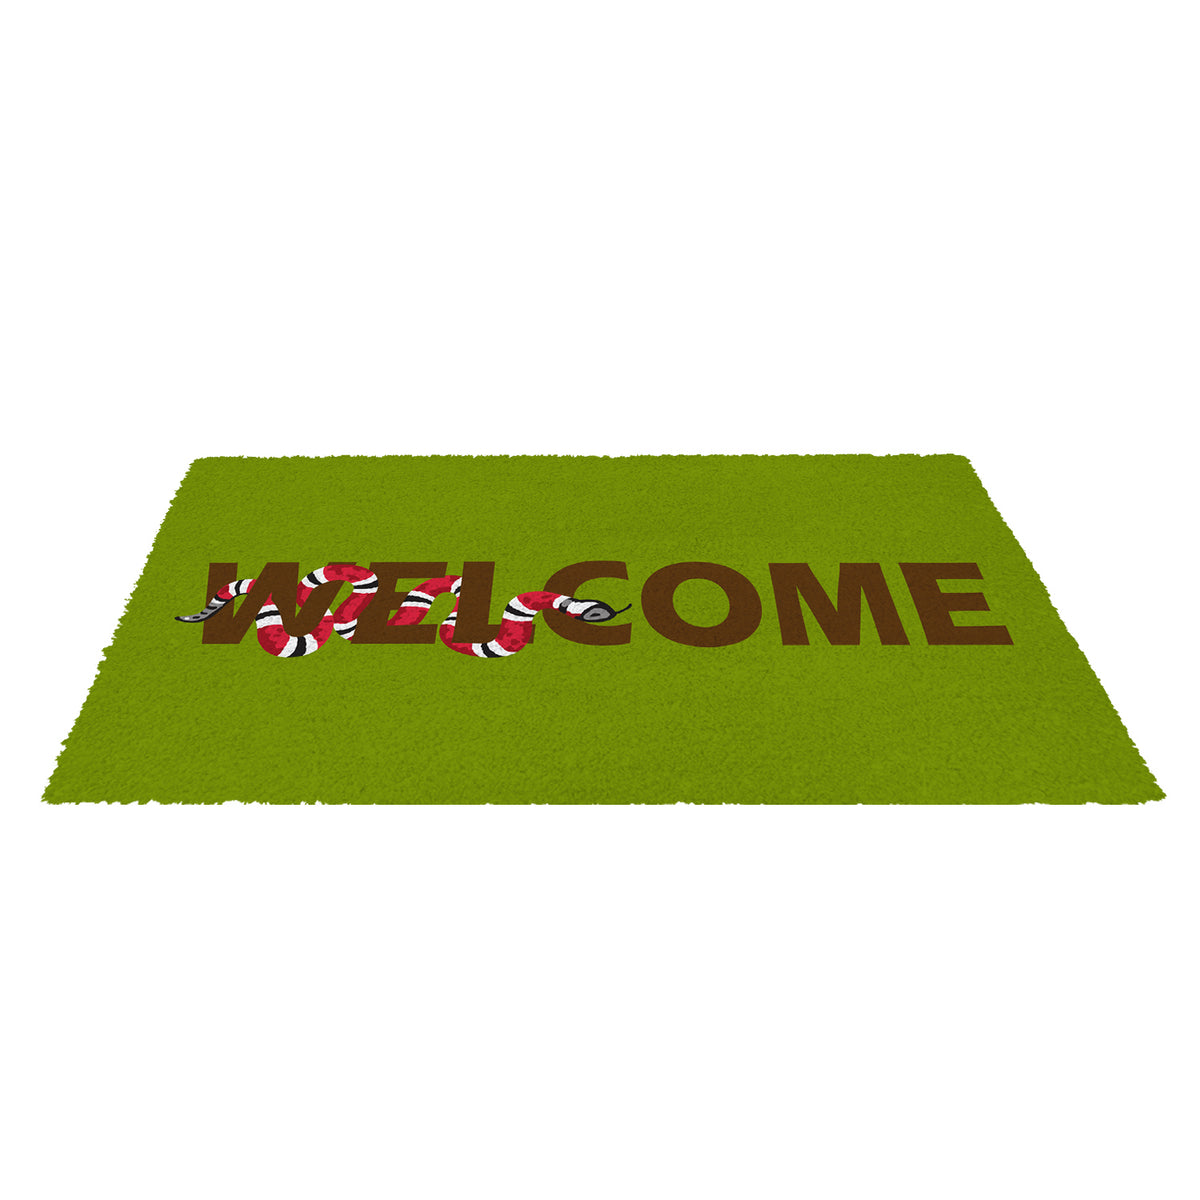 "Welcome" and Snake Printed Green Natural Coir Entrance Mat - OnlyMat